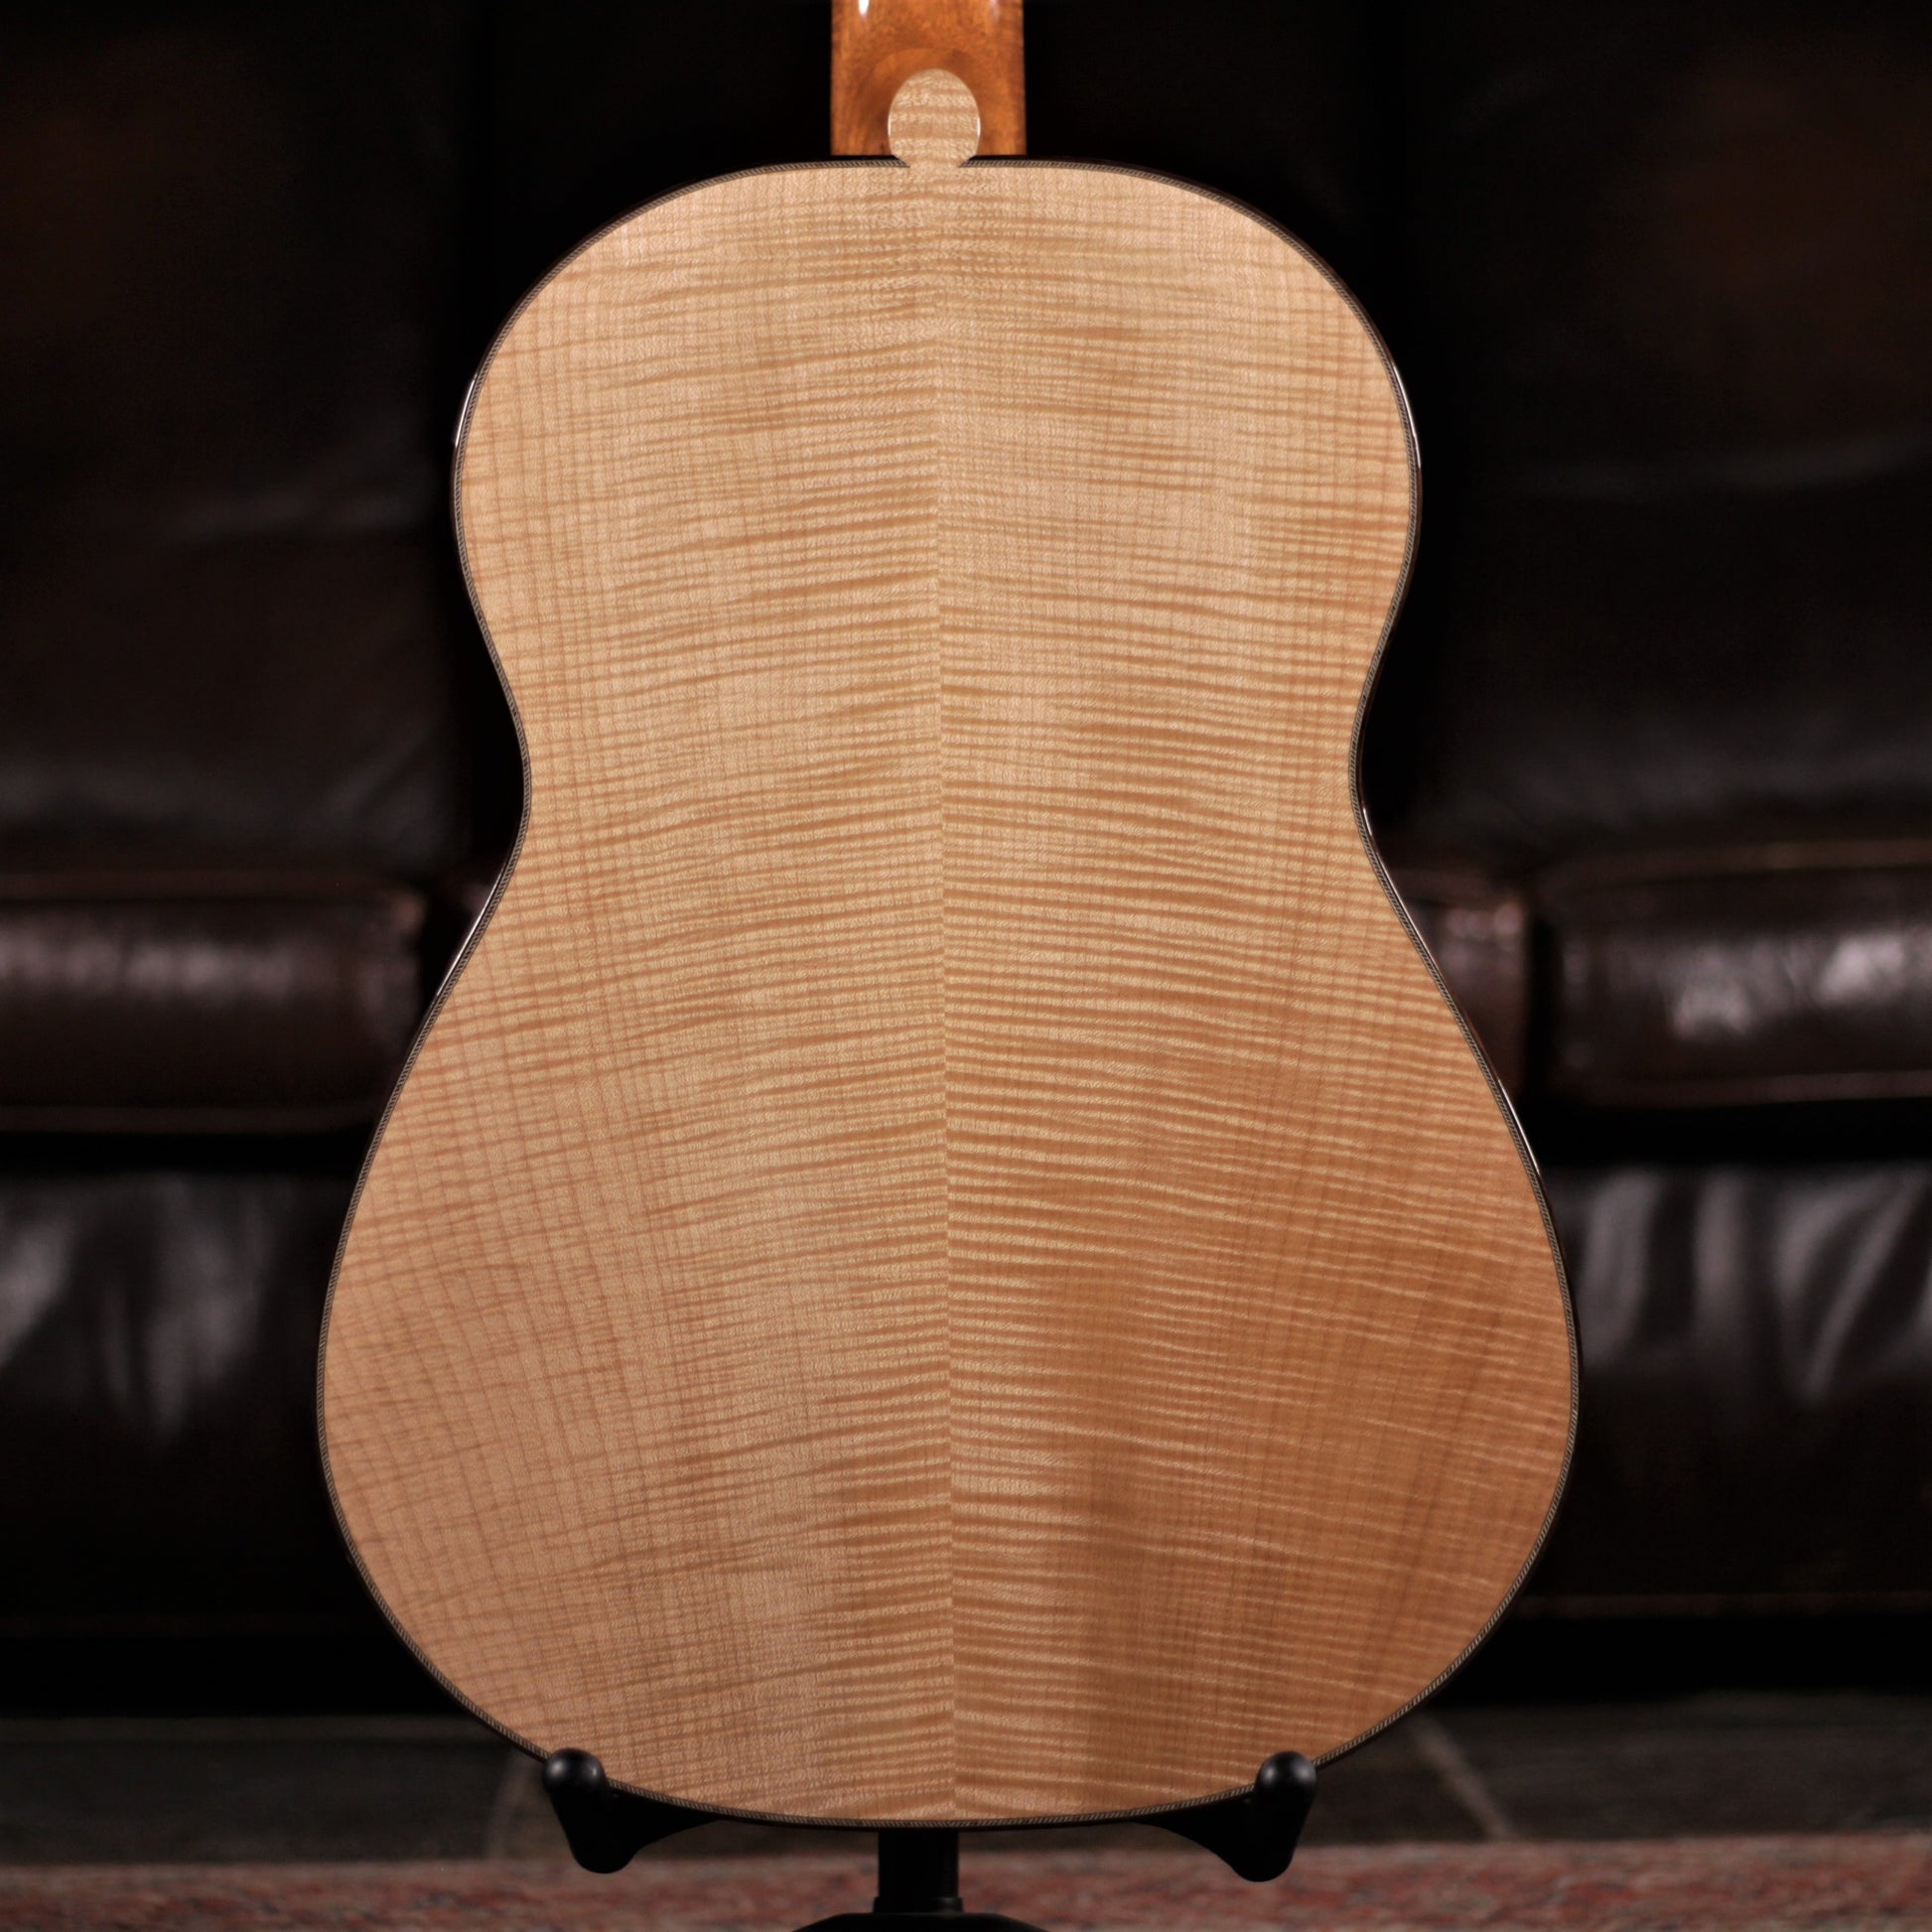 USED - Mundy Classical rear